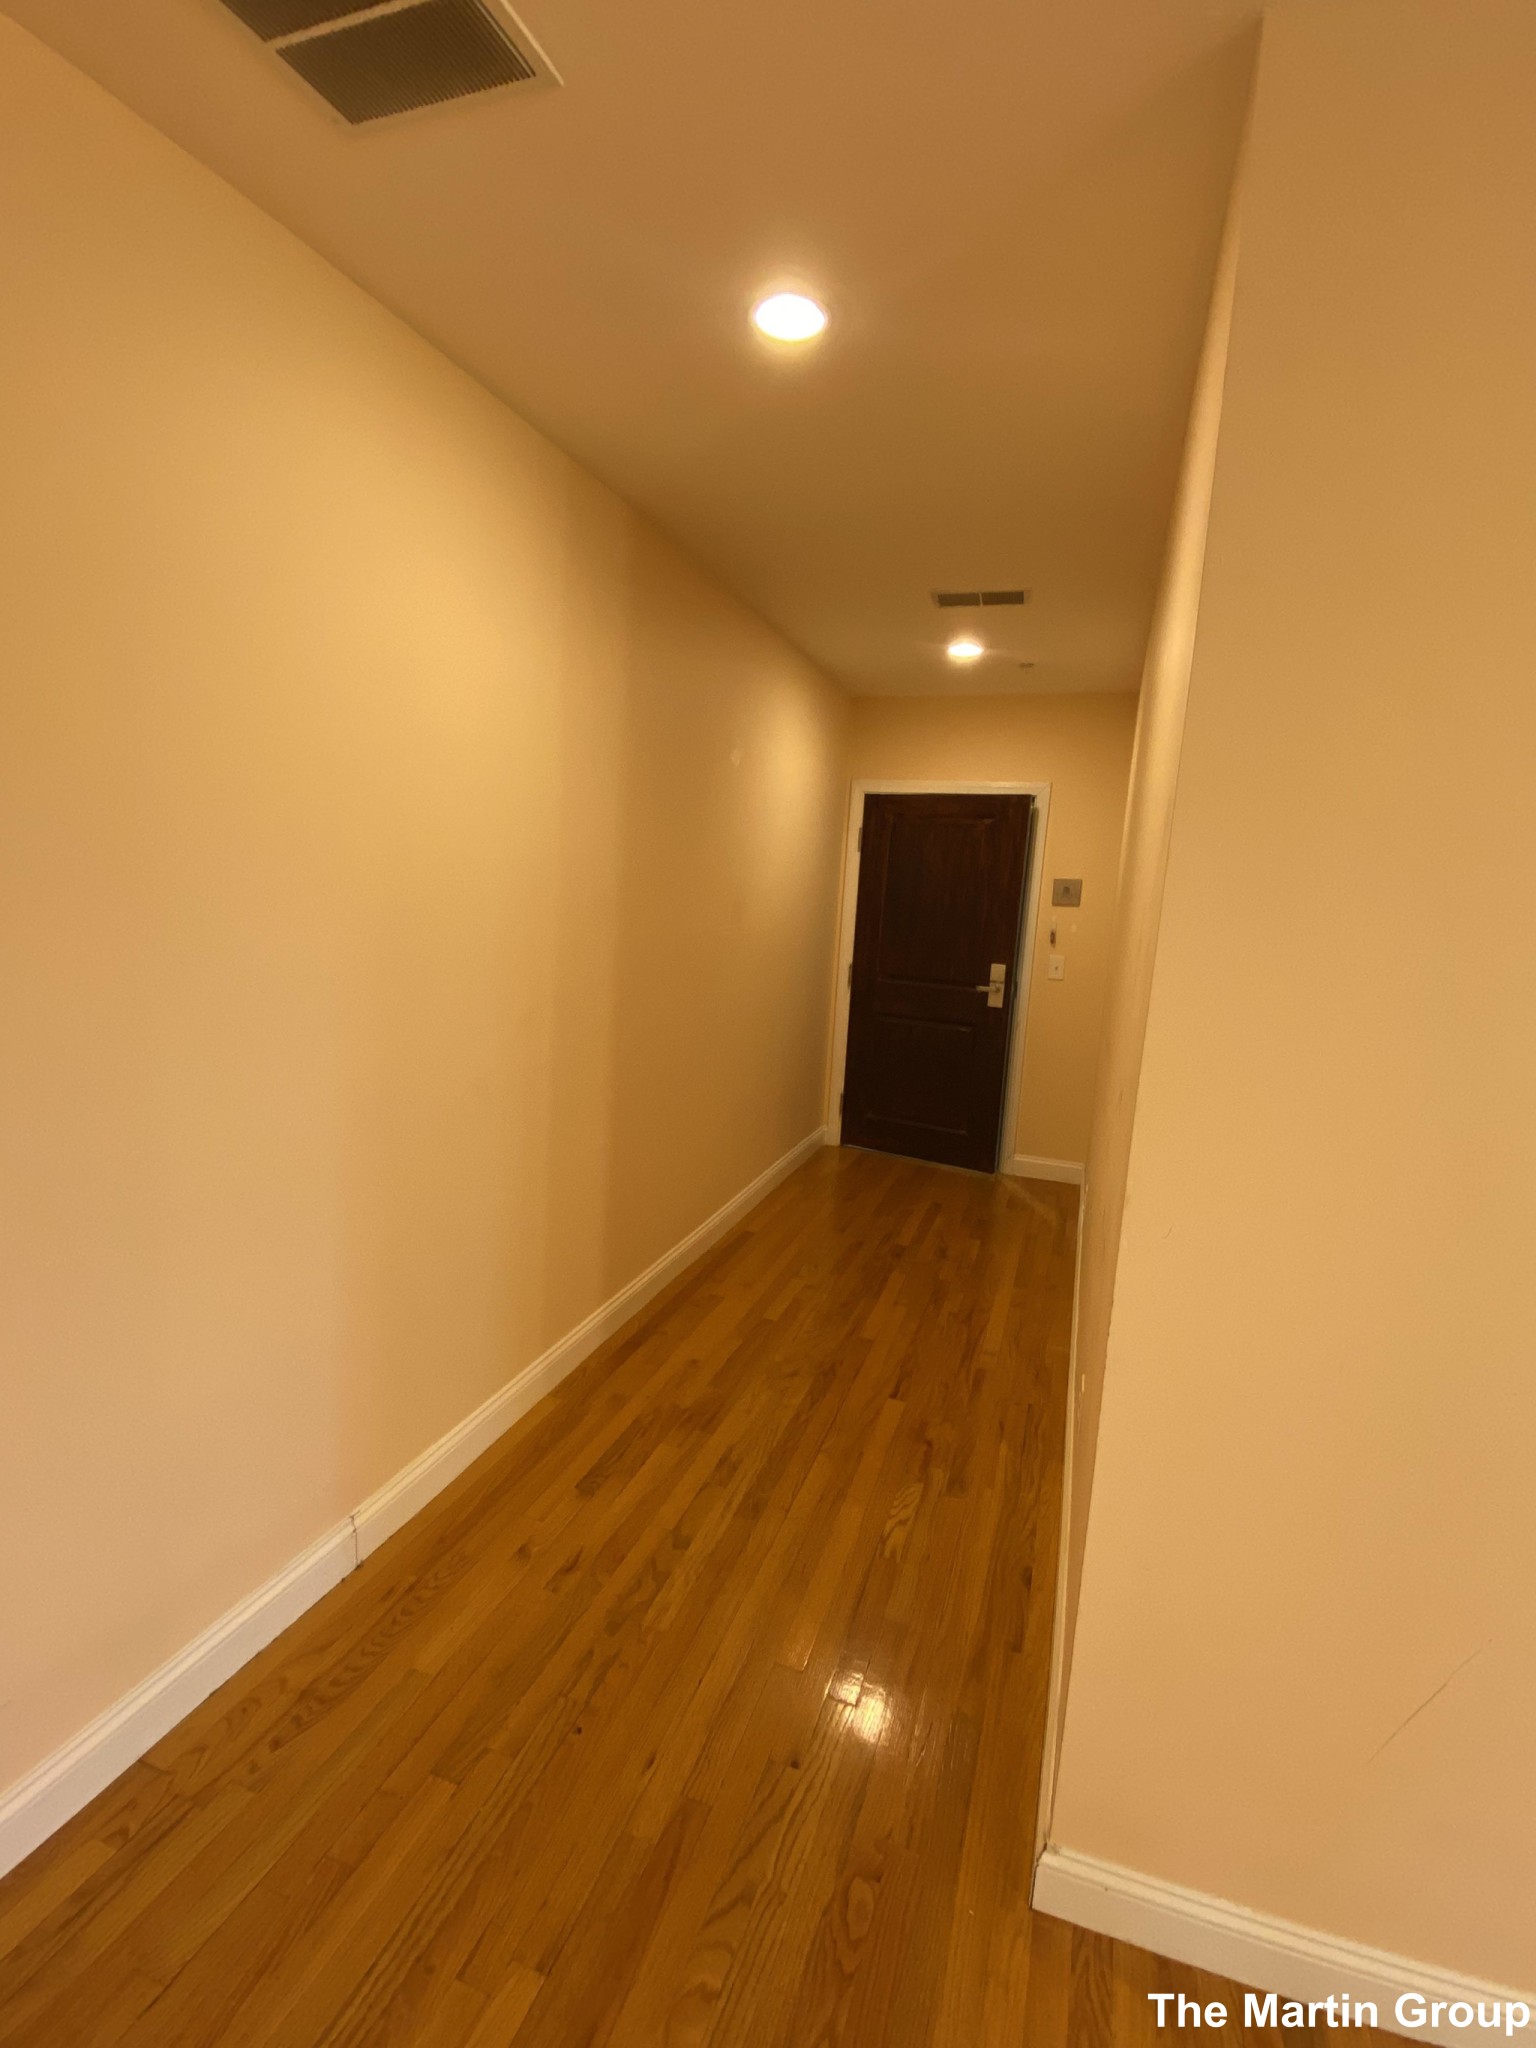 Photos of apartment on Fellsway West,Somerville MA 02145